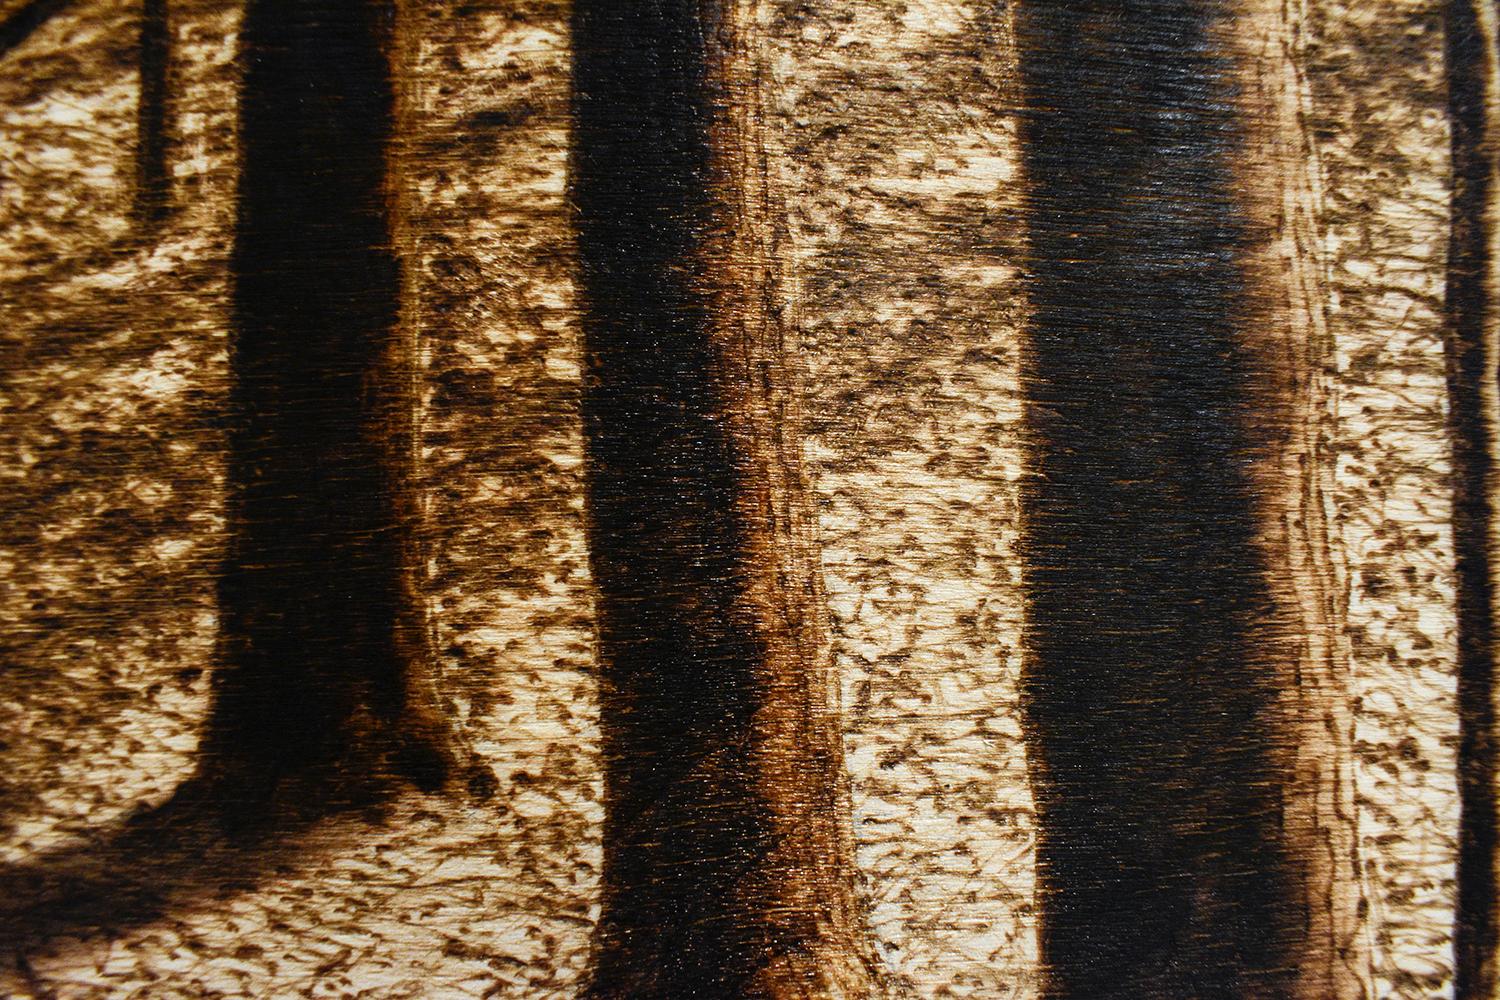 Late Afternoon Summer (Forest Landscape, Burned and Scorched Wood Drawing) - Contemporary Painting by Paul Chojnowski